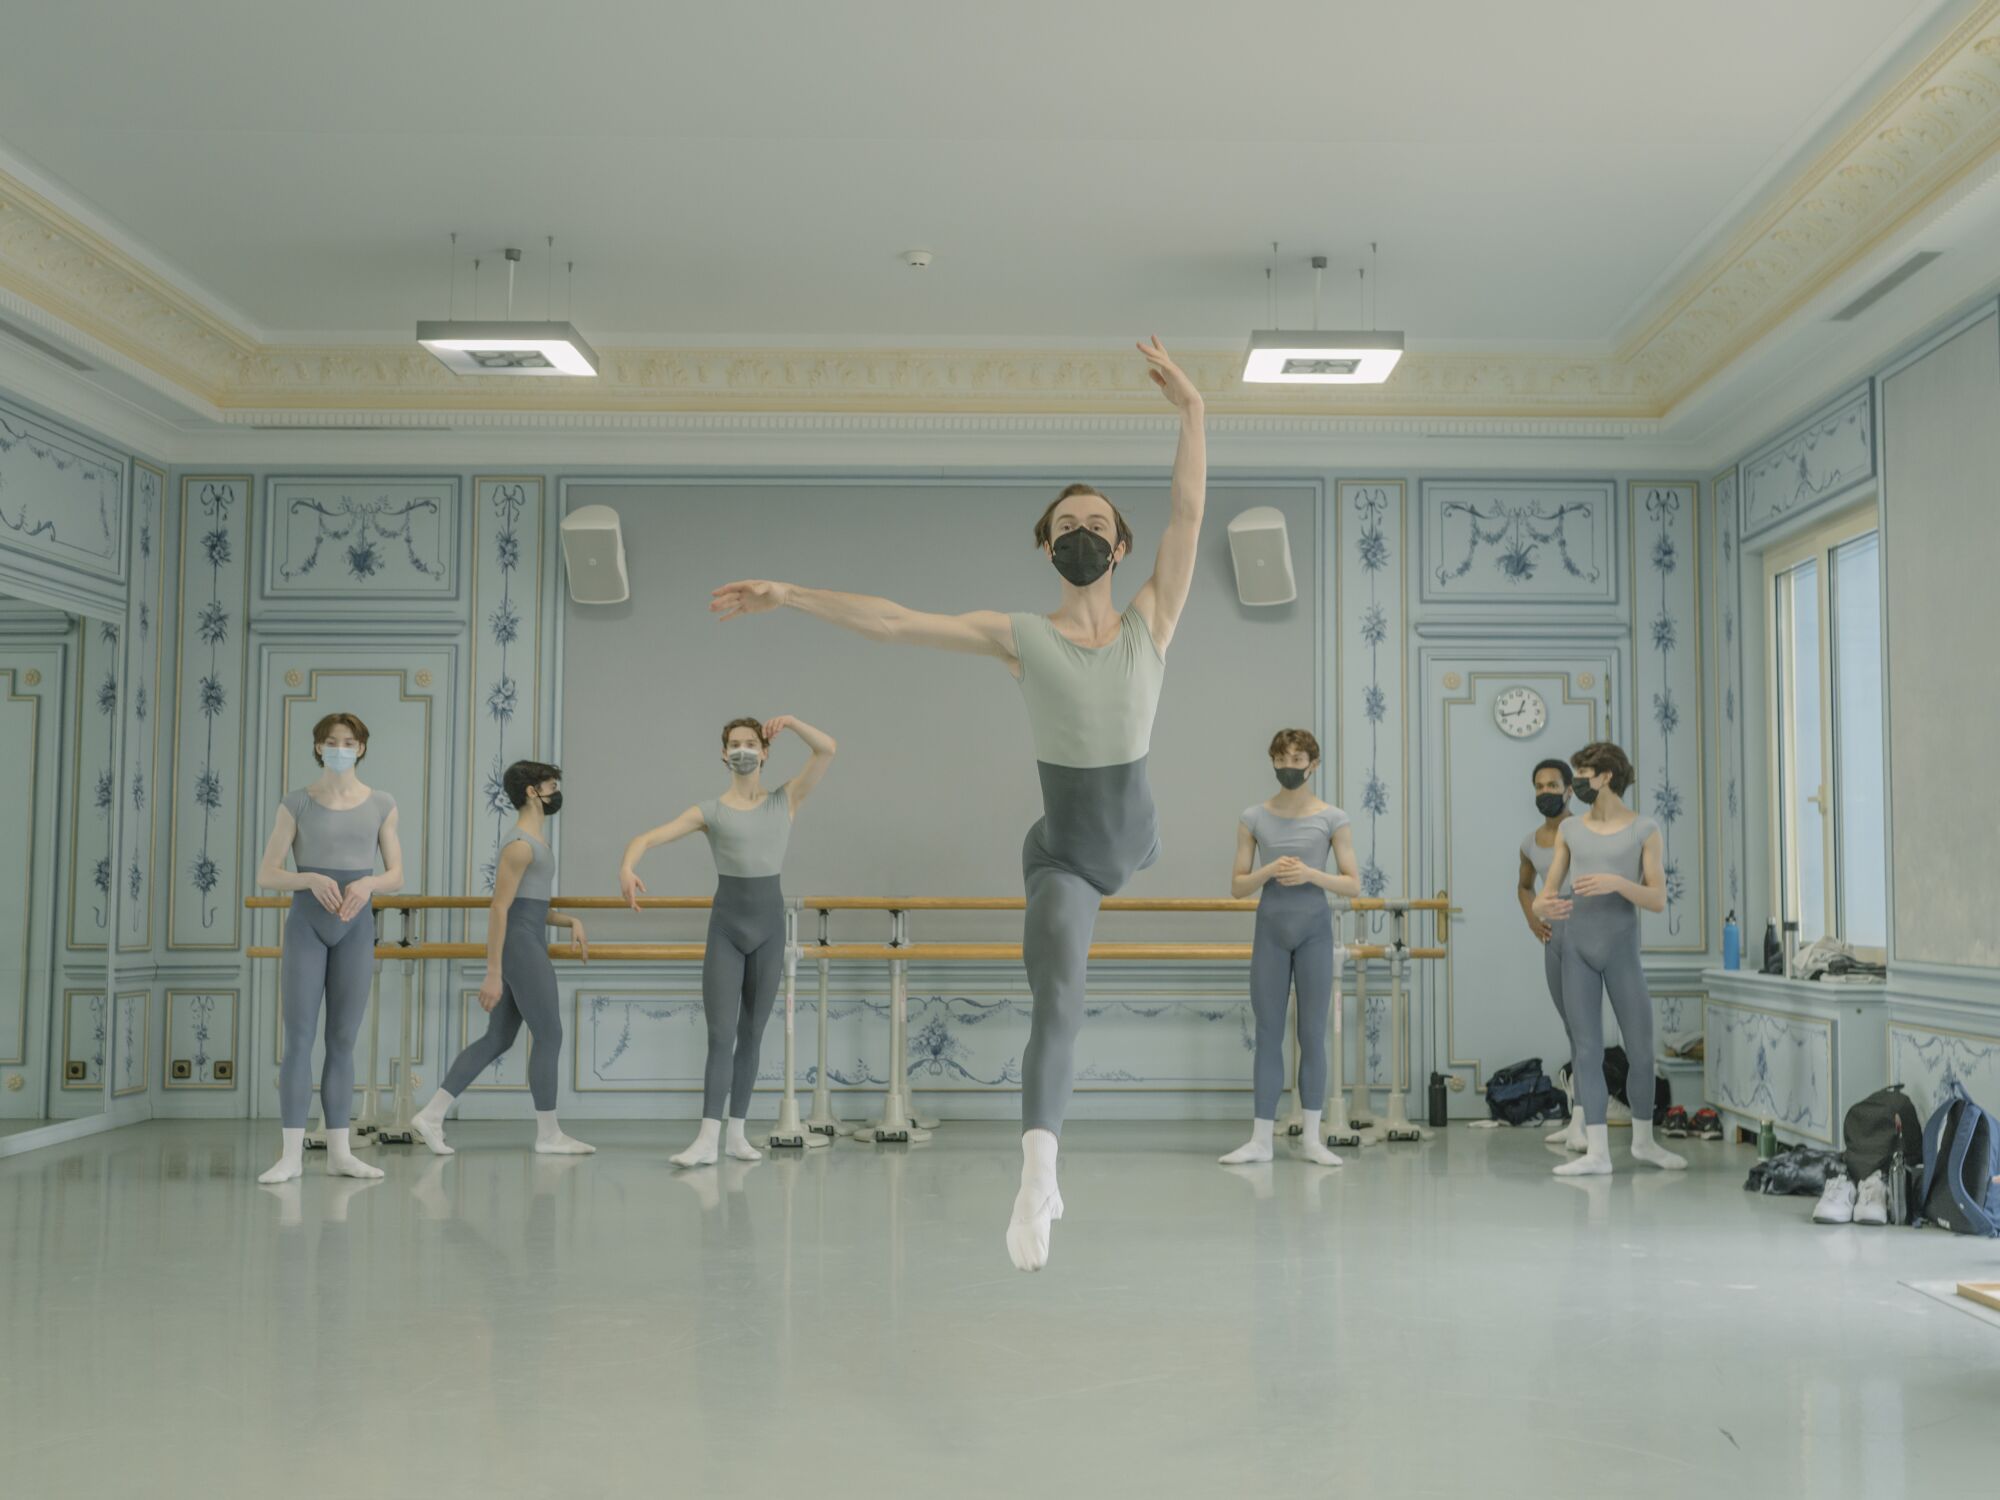 A boy leaps in a ballet studio with other boys at the bar behind him  